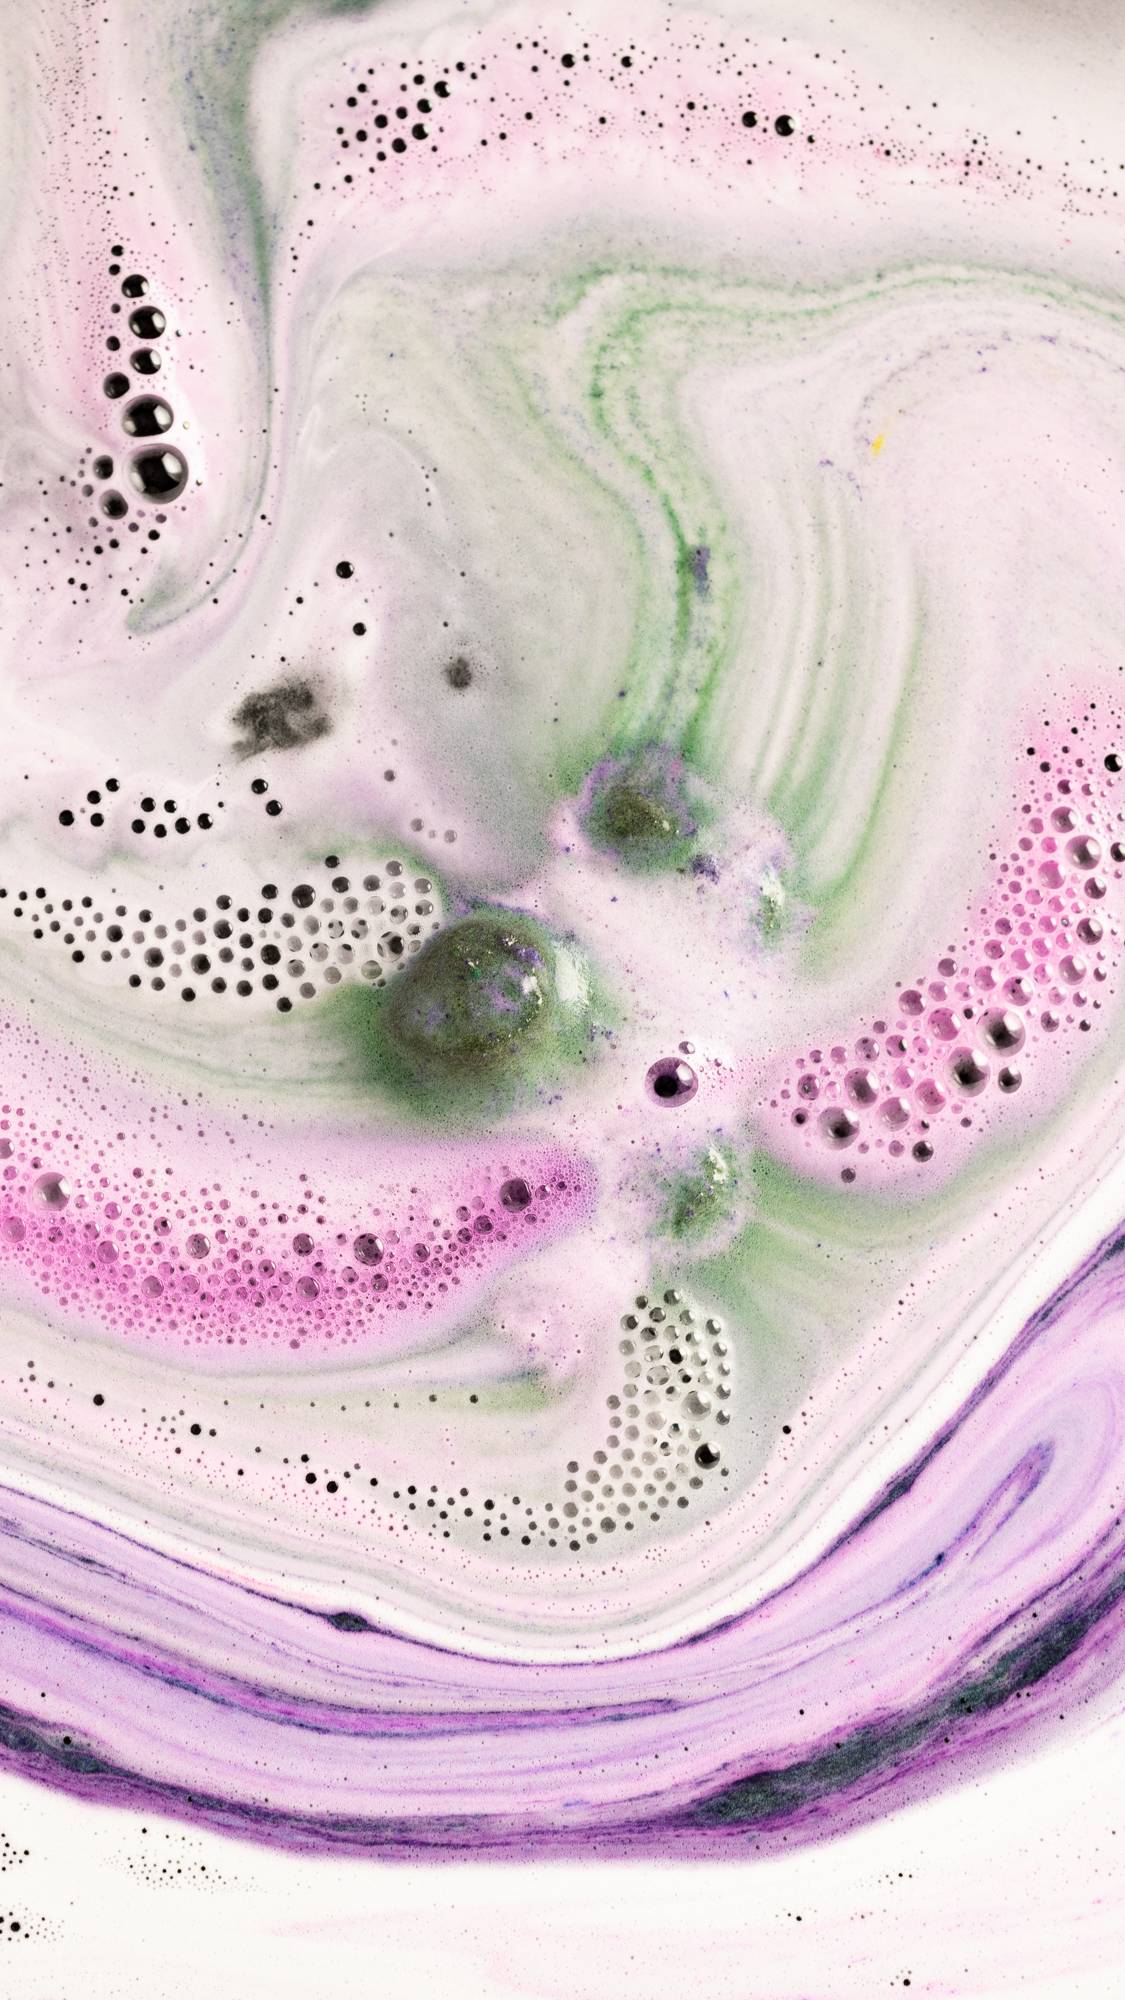 The Cloud bath bomb has almost fully dissolved surrounded by bright pink and deep green mesmerising swirls. 